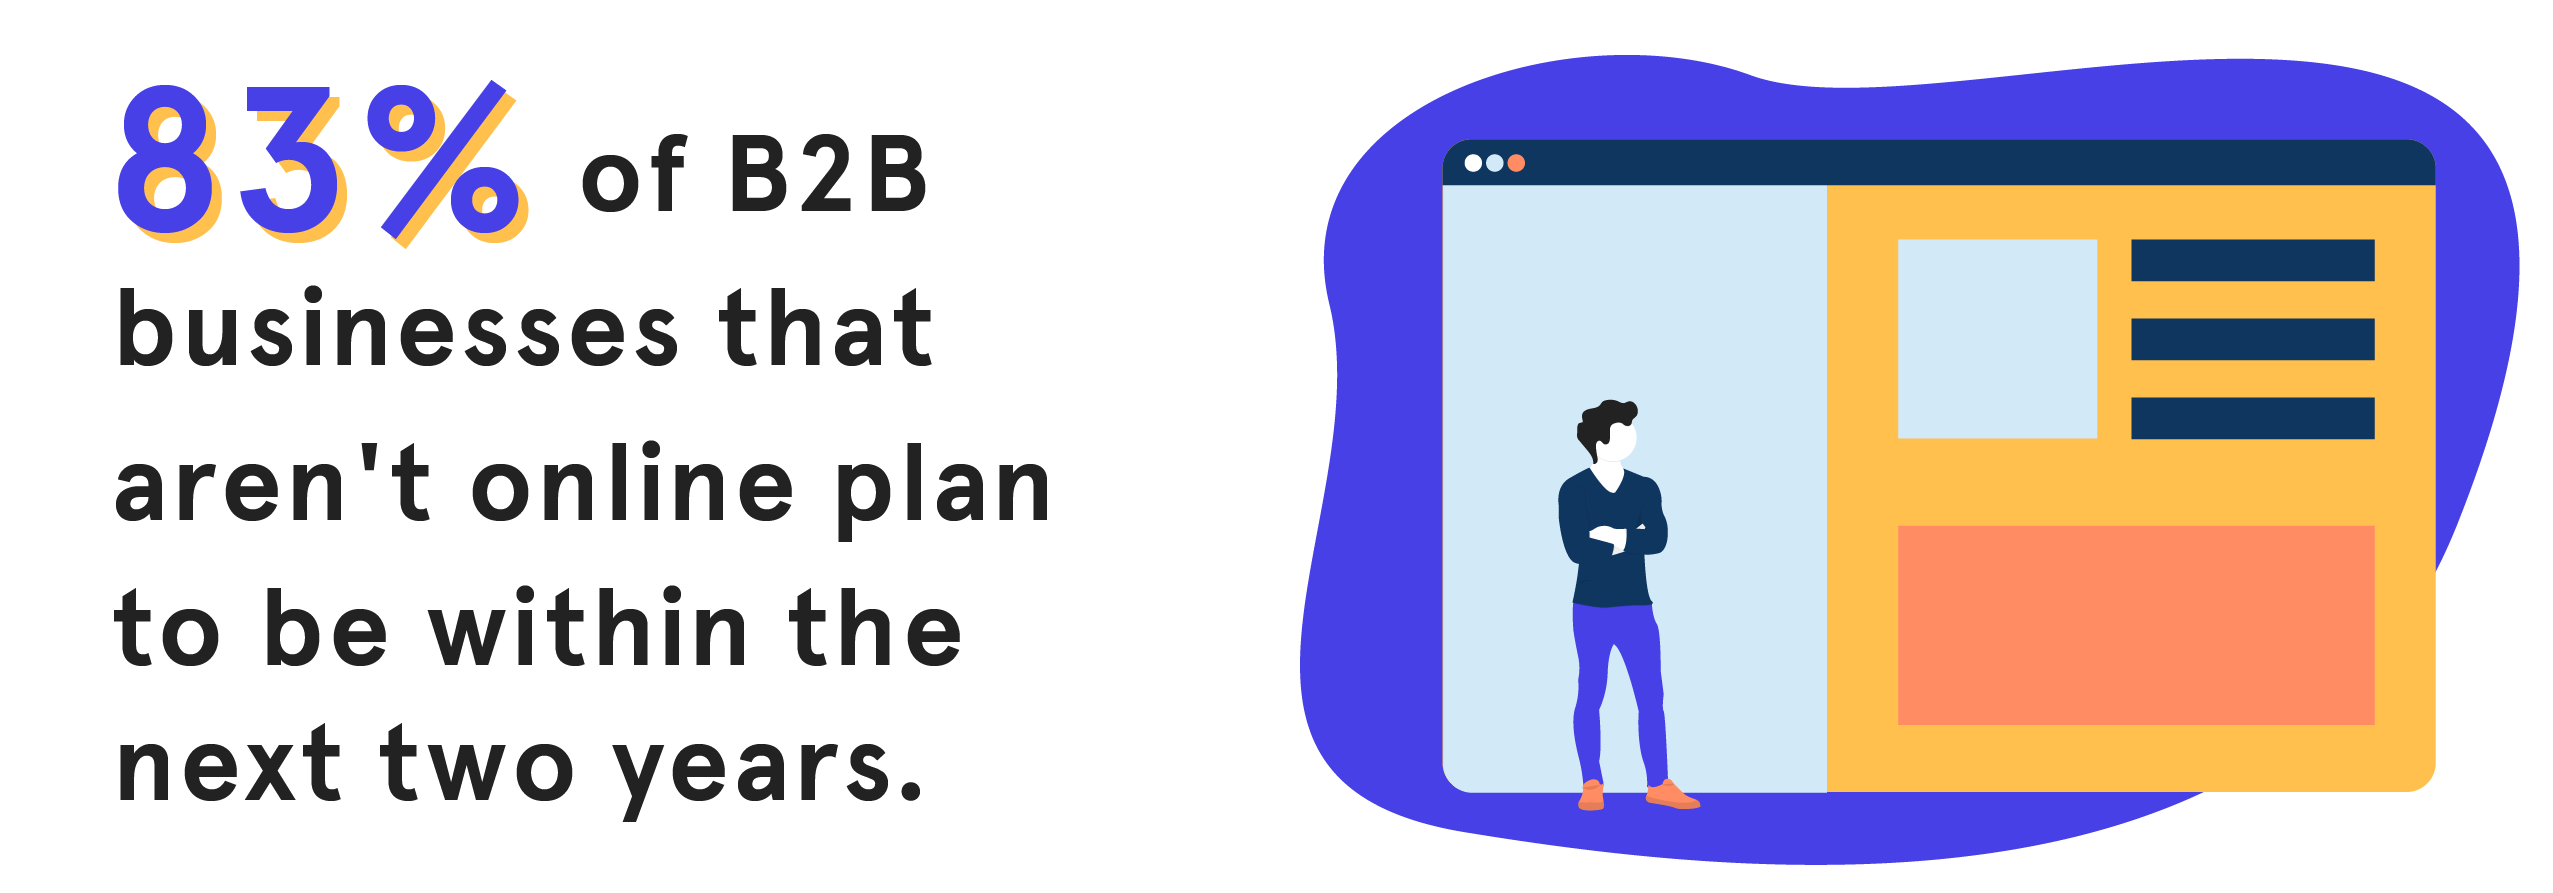 STATS-03 - B2B businesses plan to be online-01